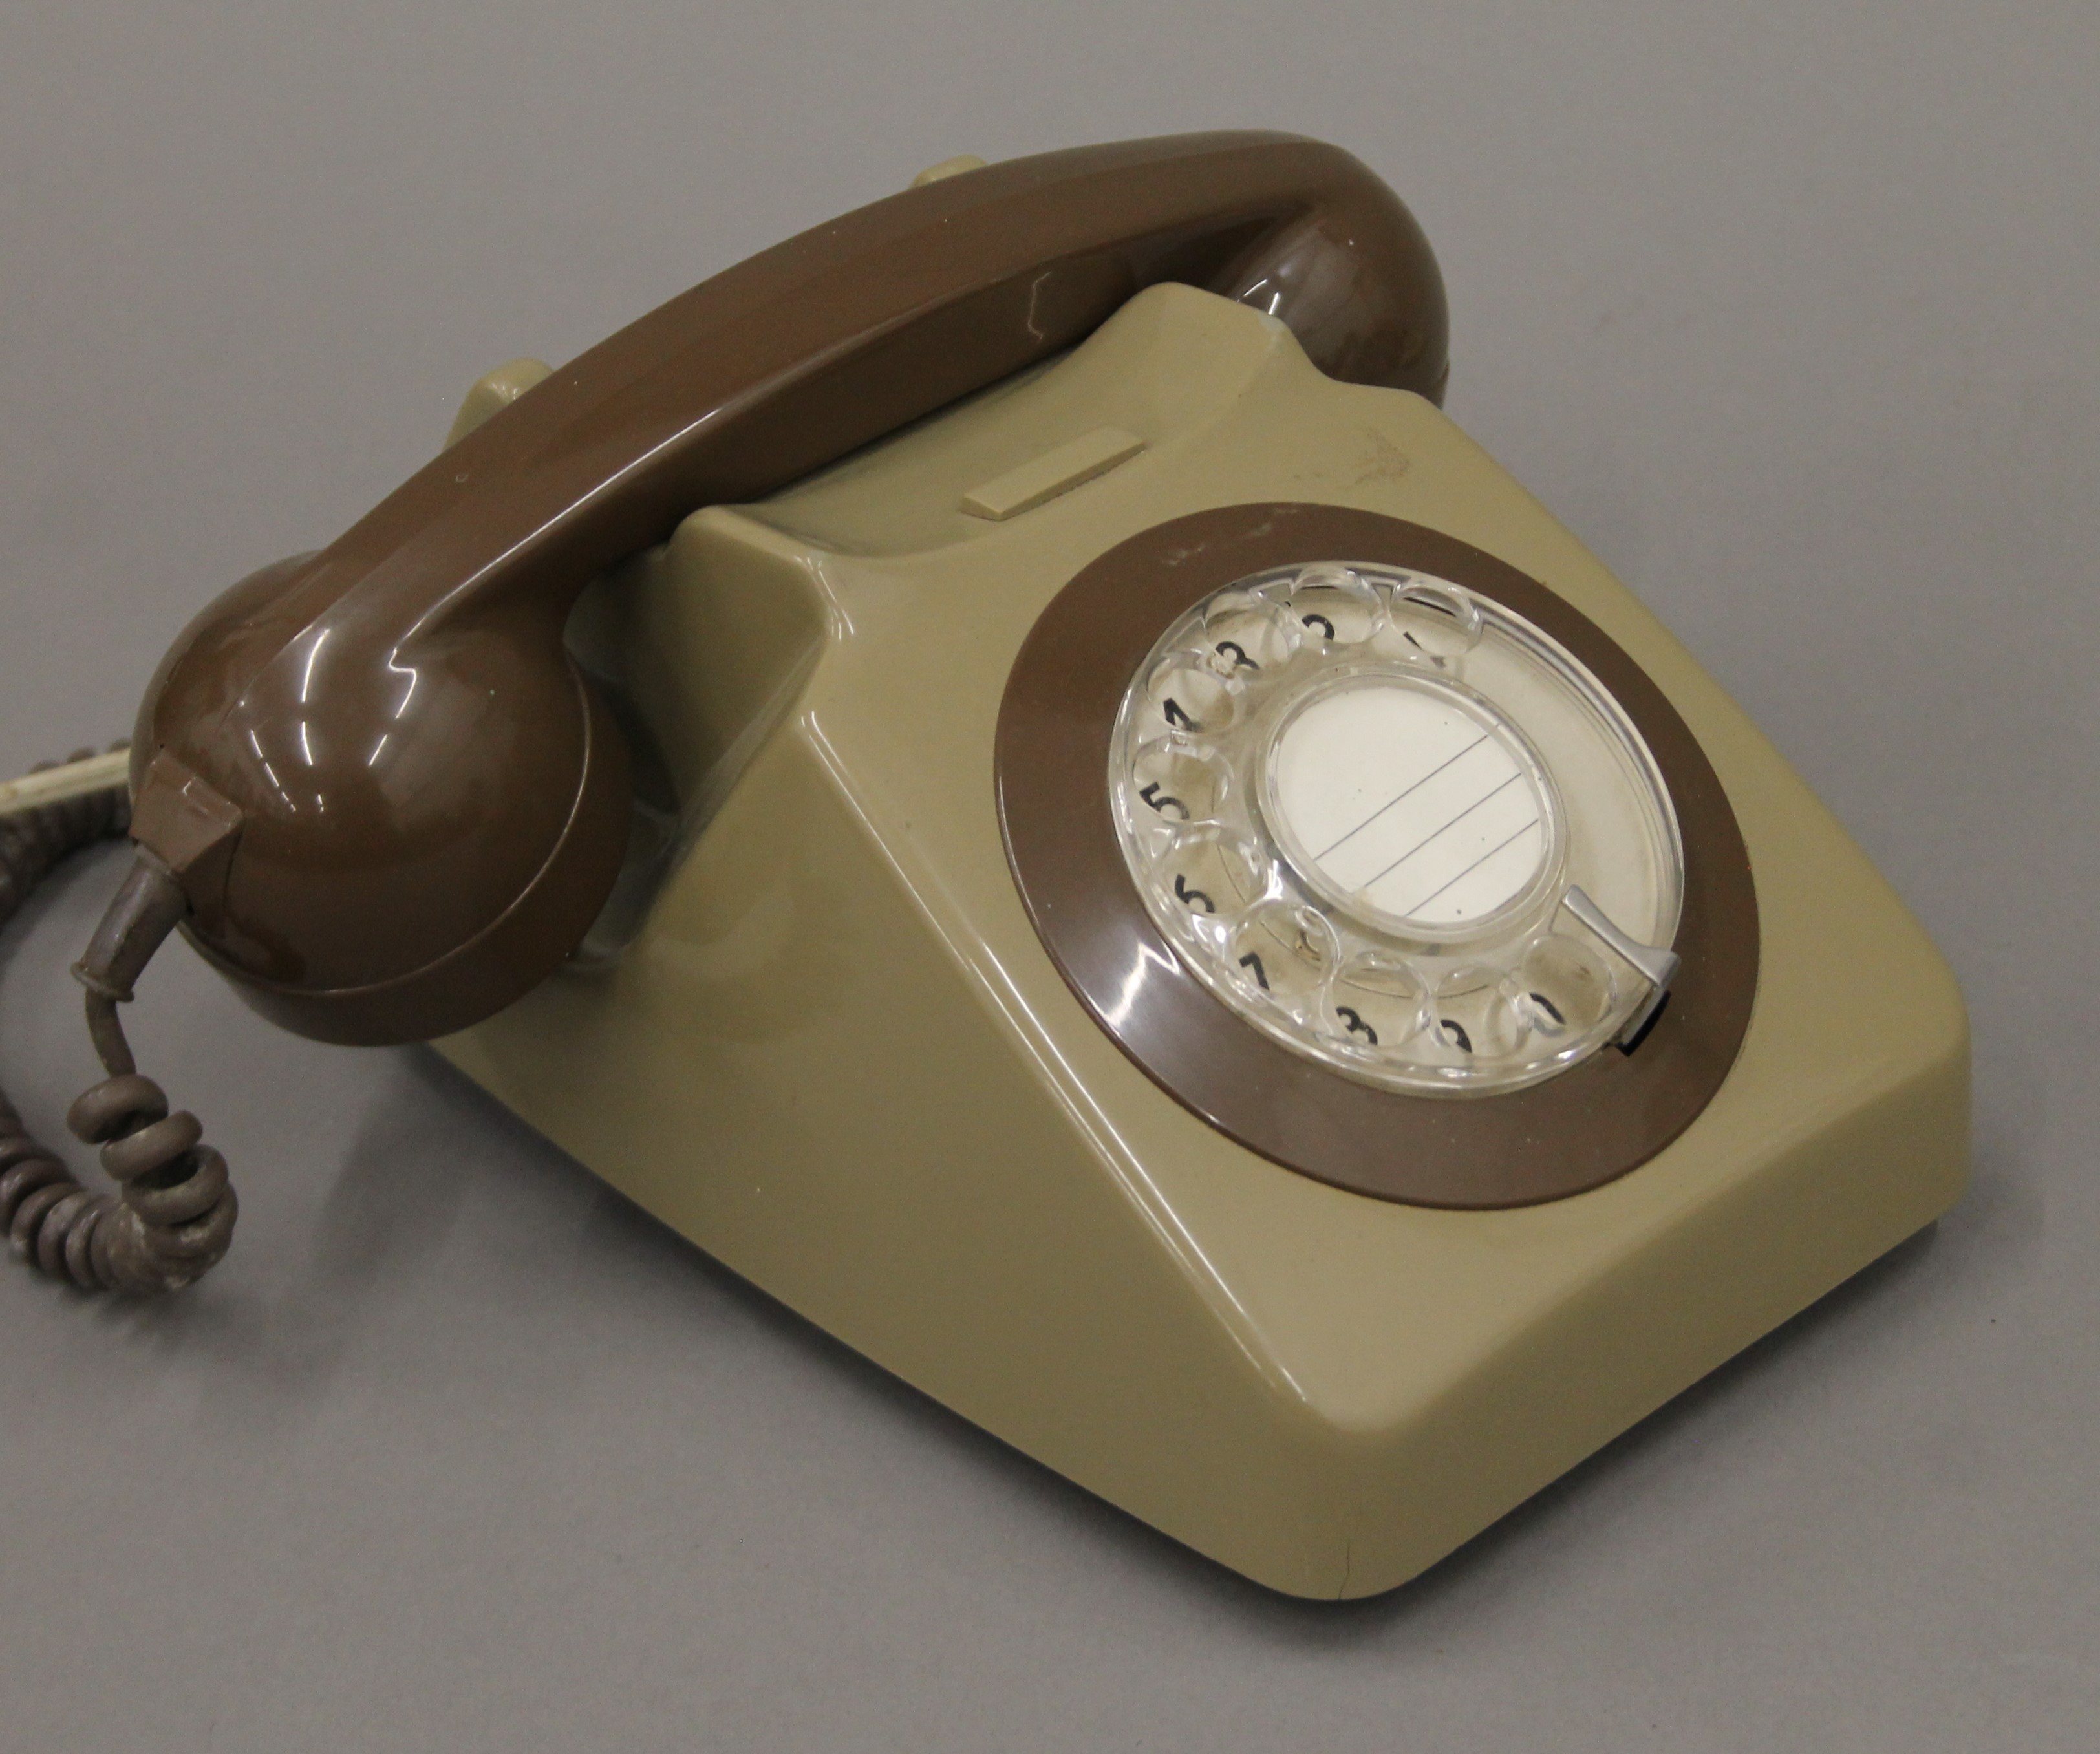 A box of vintage telephones. - Image 6 of 6